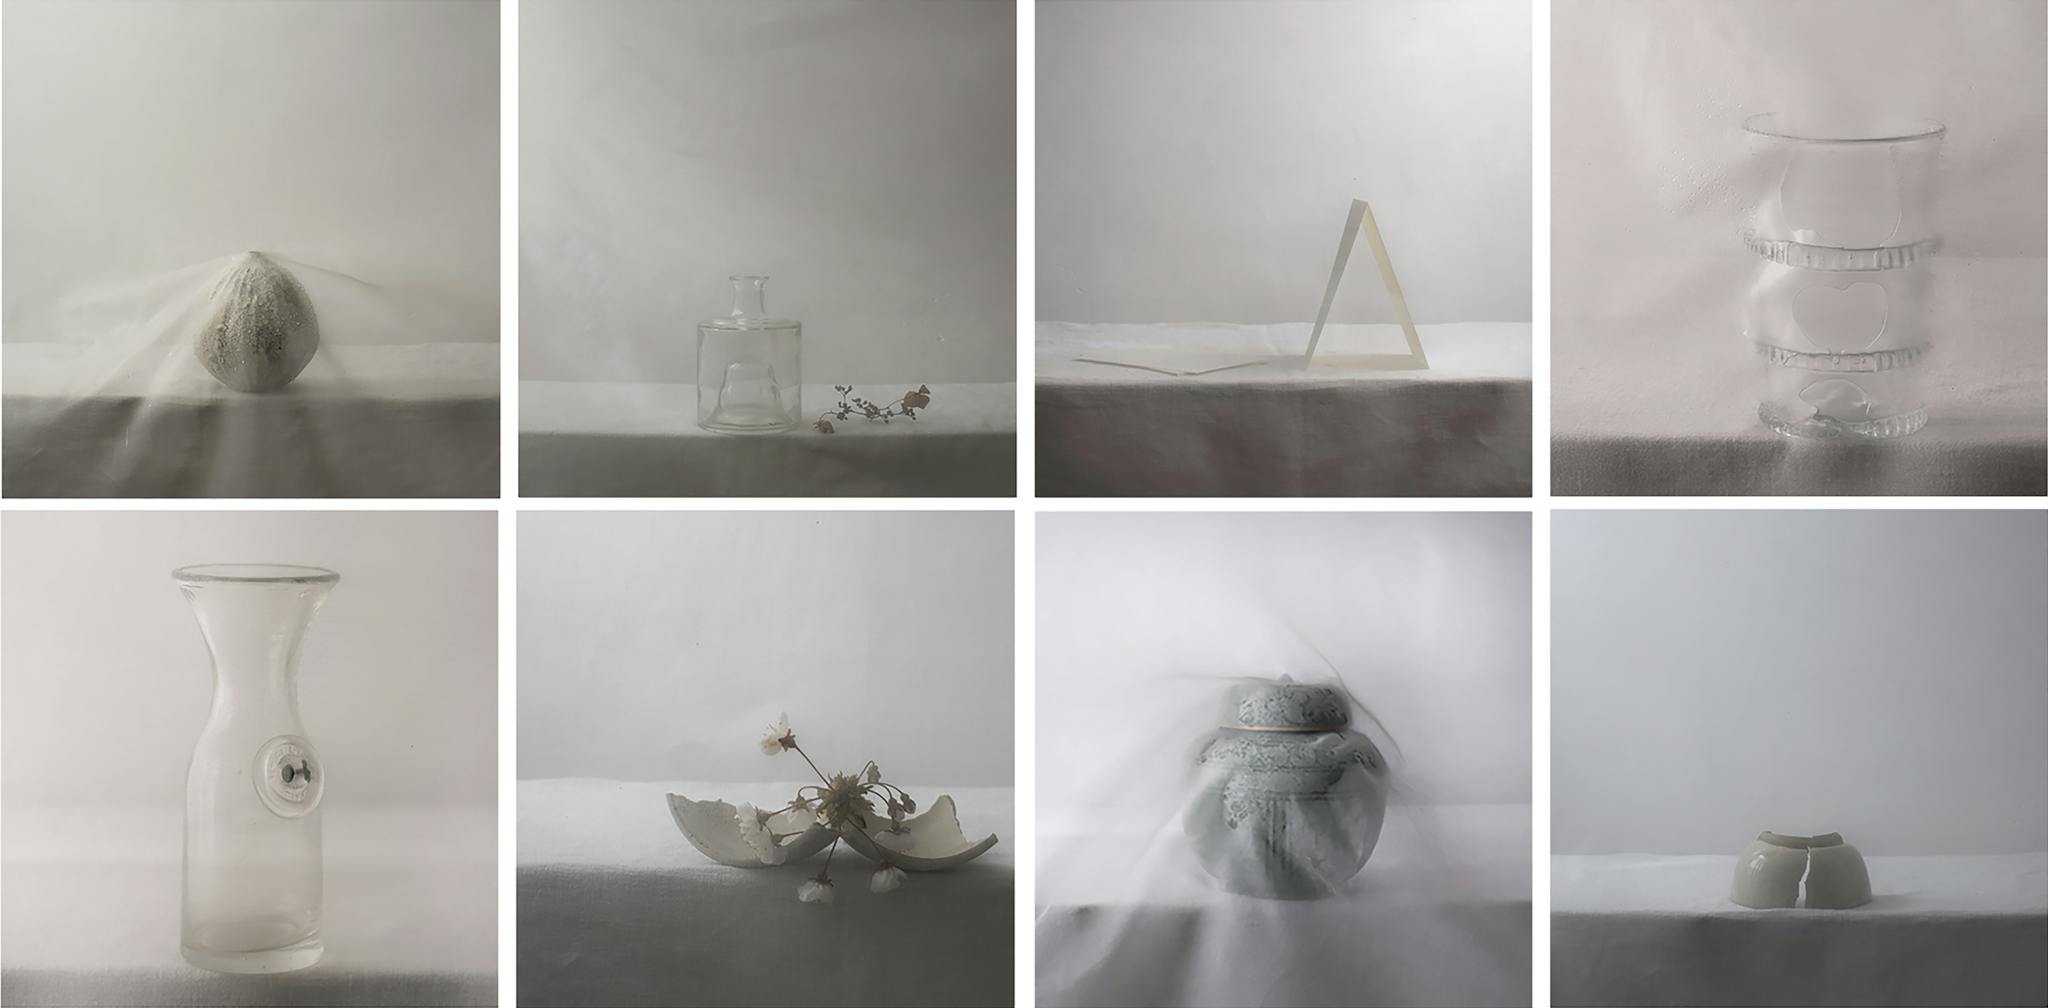 Image shows a series of objects on a surface, shrouded in sheer fabric and with muted tones and lighting